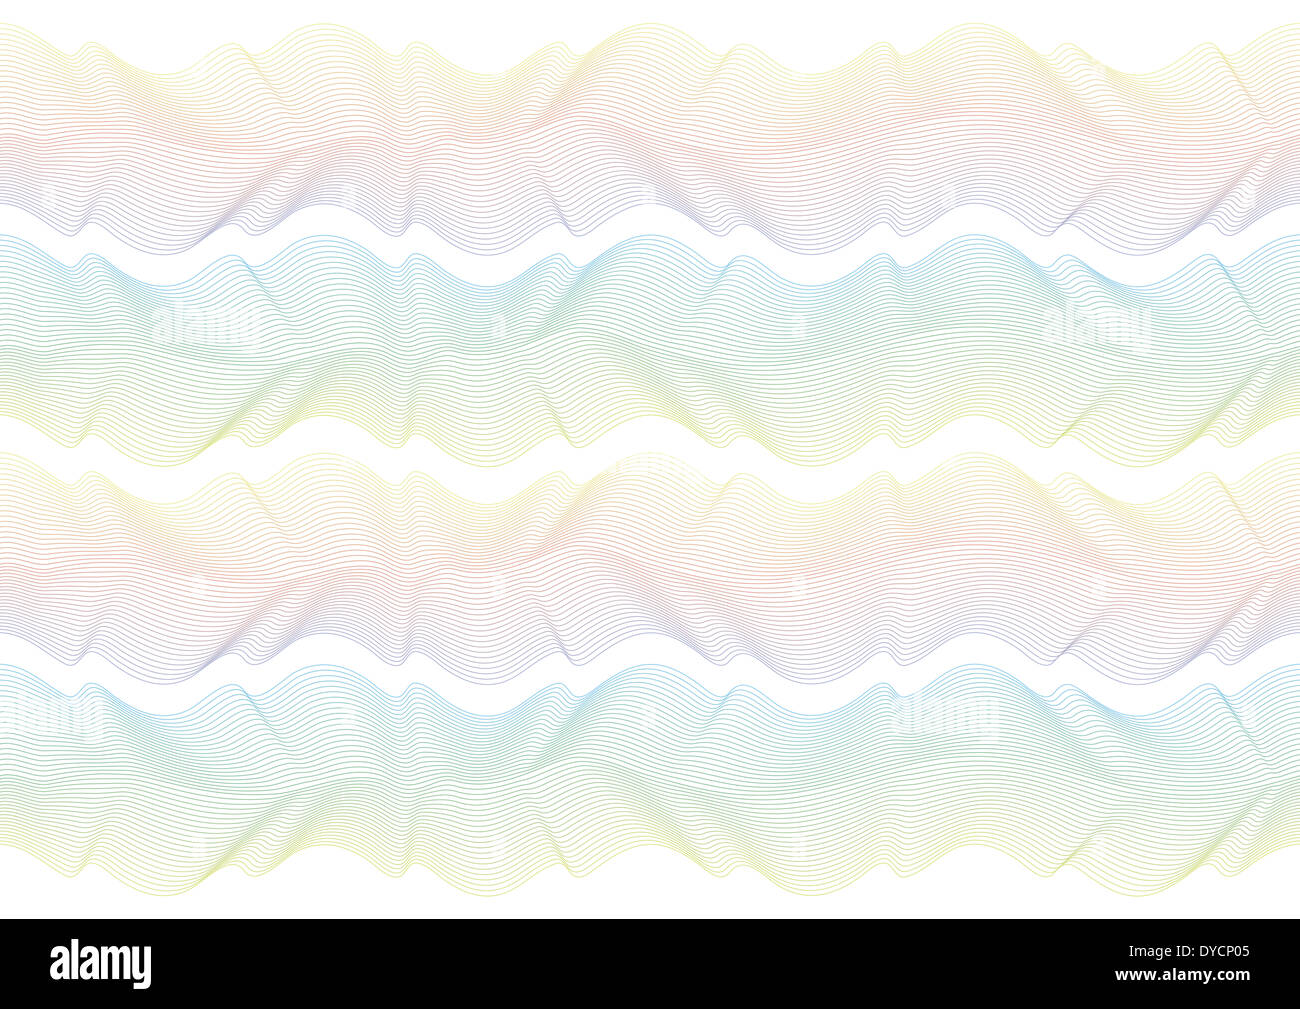 Colored wavy lines on white background for your text. Stock Photo